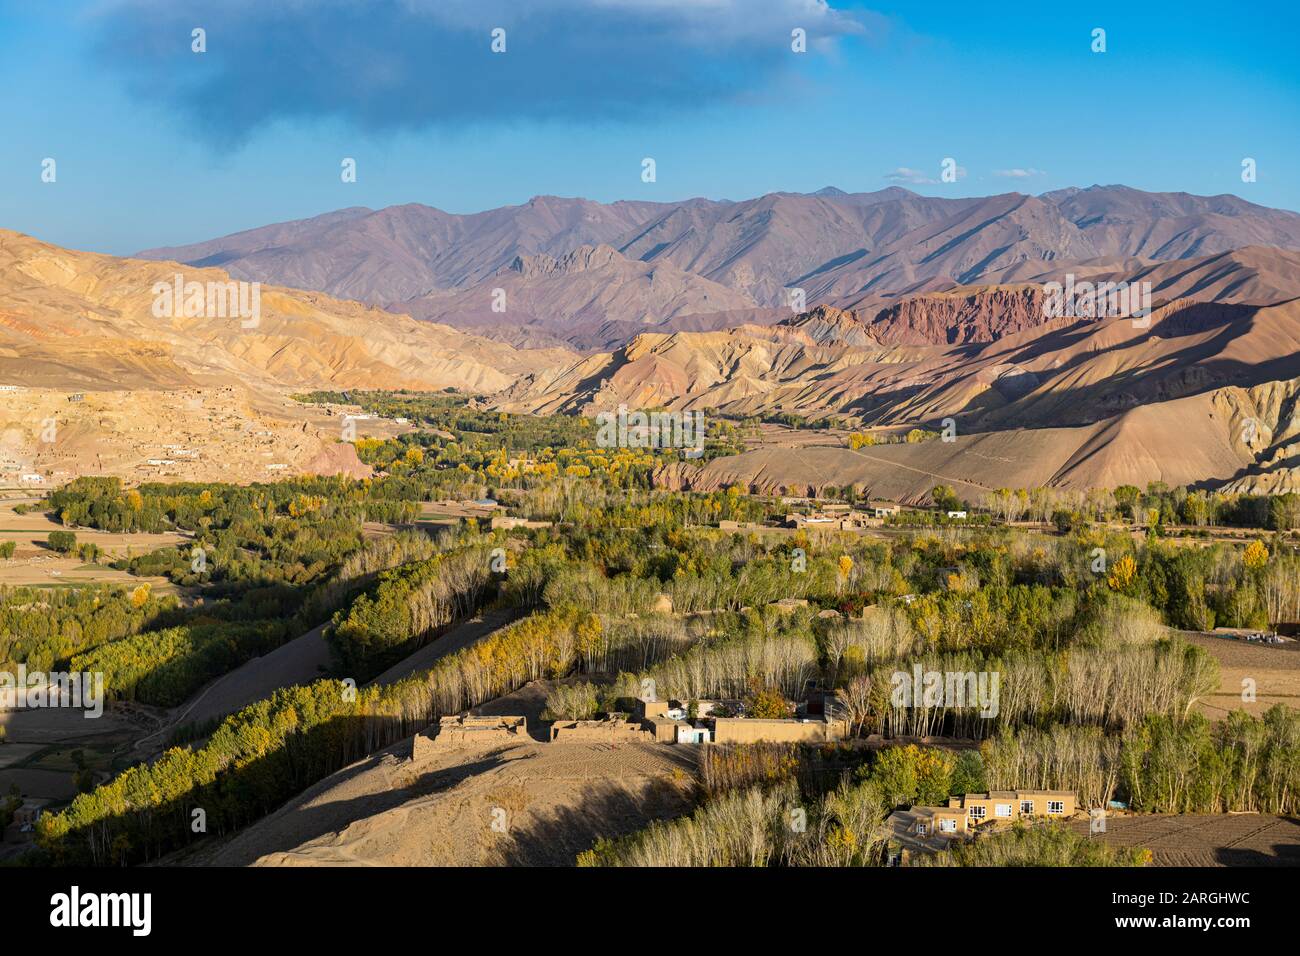 View by drone over Bamyan, Shahr-e Gholghola (City of Screams) ruins, Bamyan, Afghanistan, Asia Stock Photo